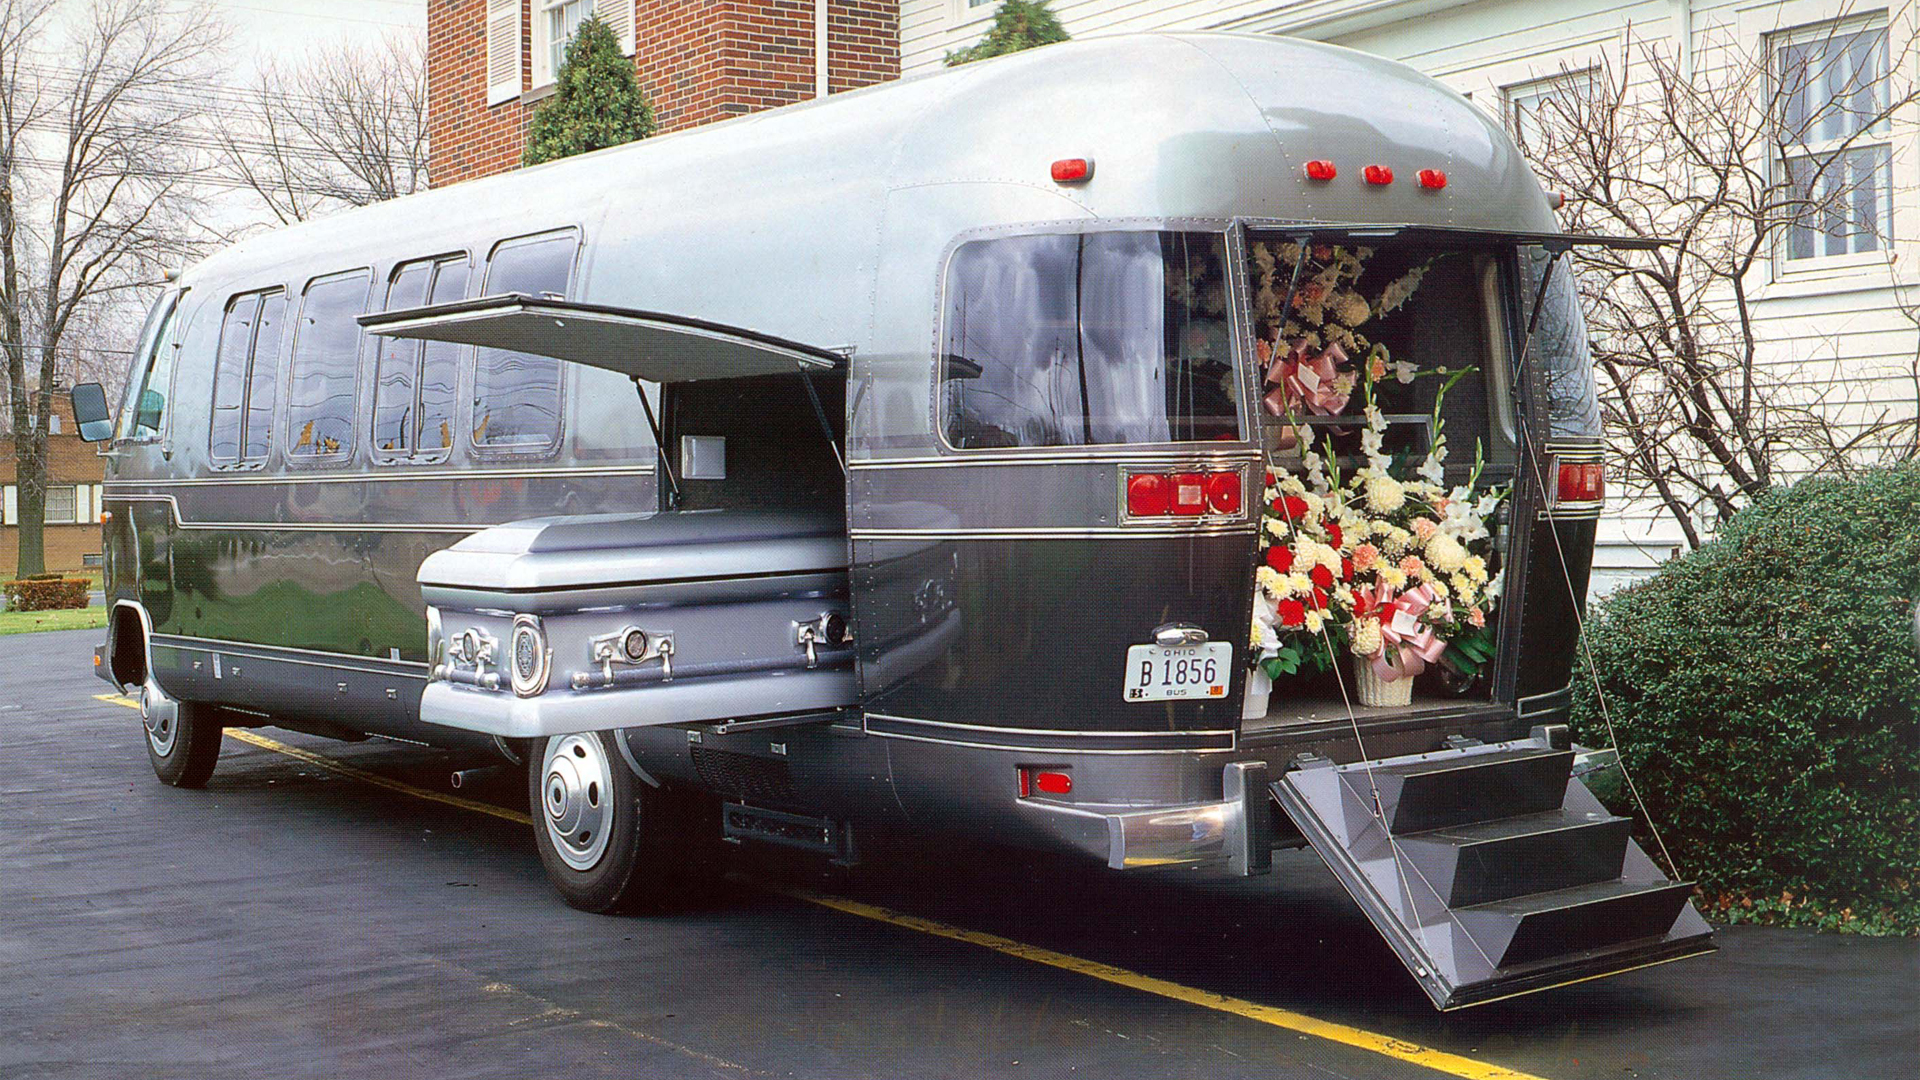 Vintage Airstream Funeral Coach sitting at a funeral home with flowers in the back and a coffin in the side of the Airstream.